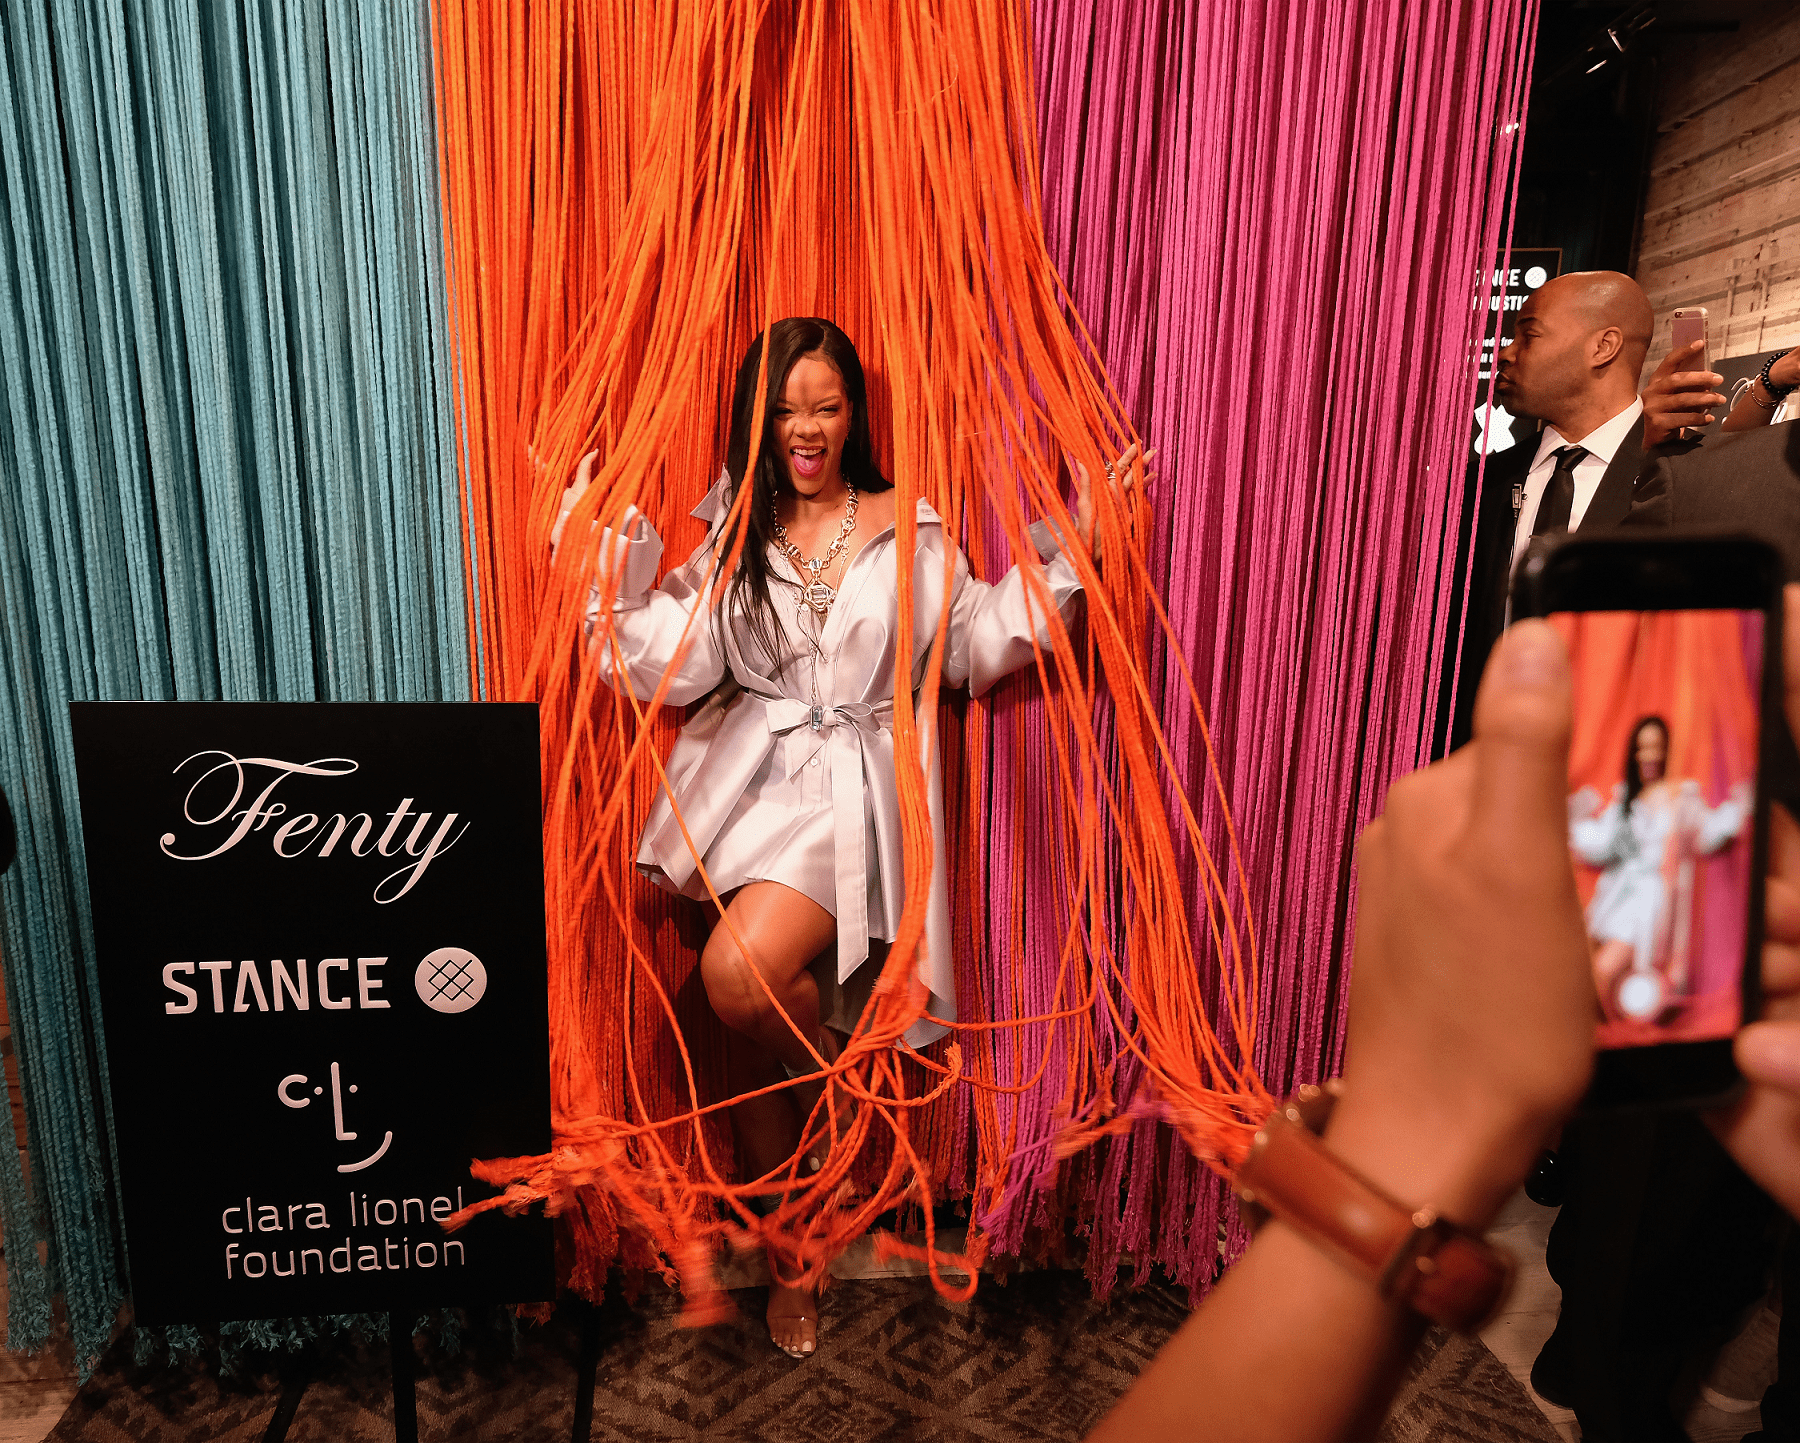 An animated Rihanna poses against a colorful backdrop at an event in 2018